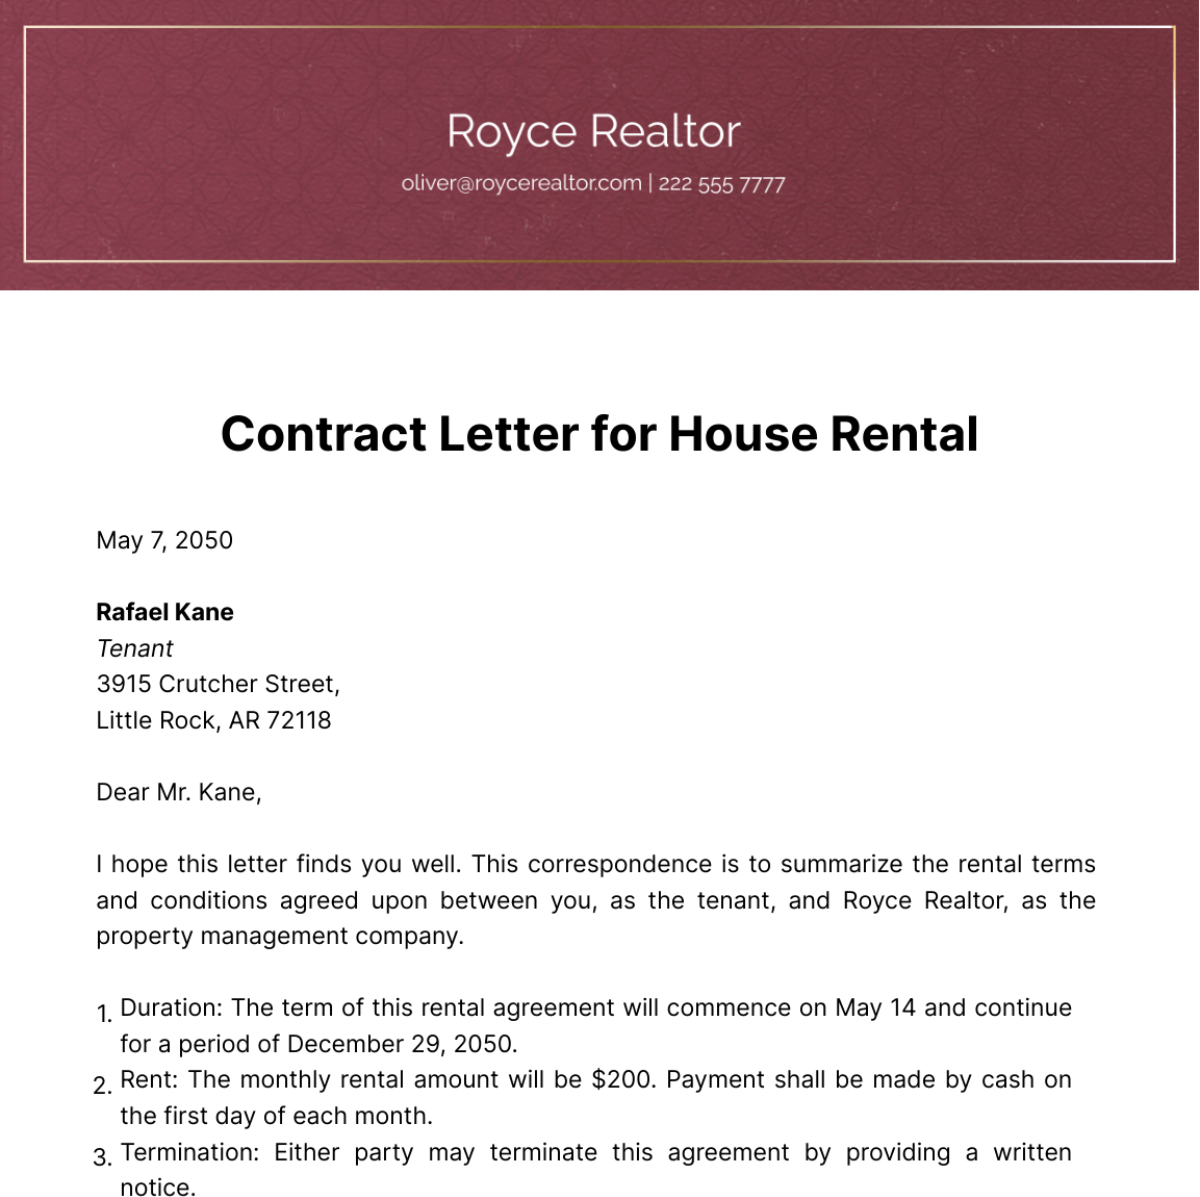 Contract Letter for House Rental   Template